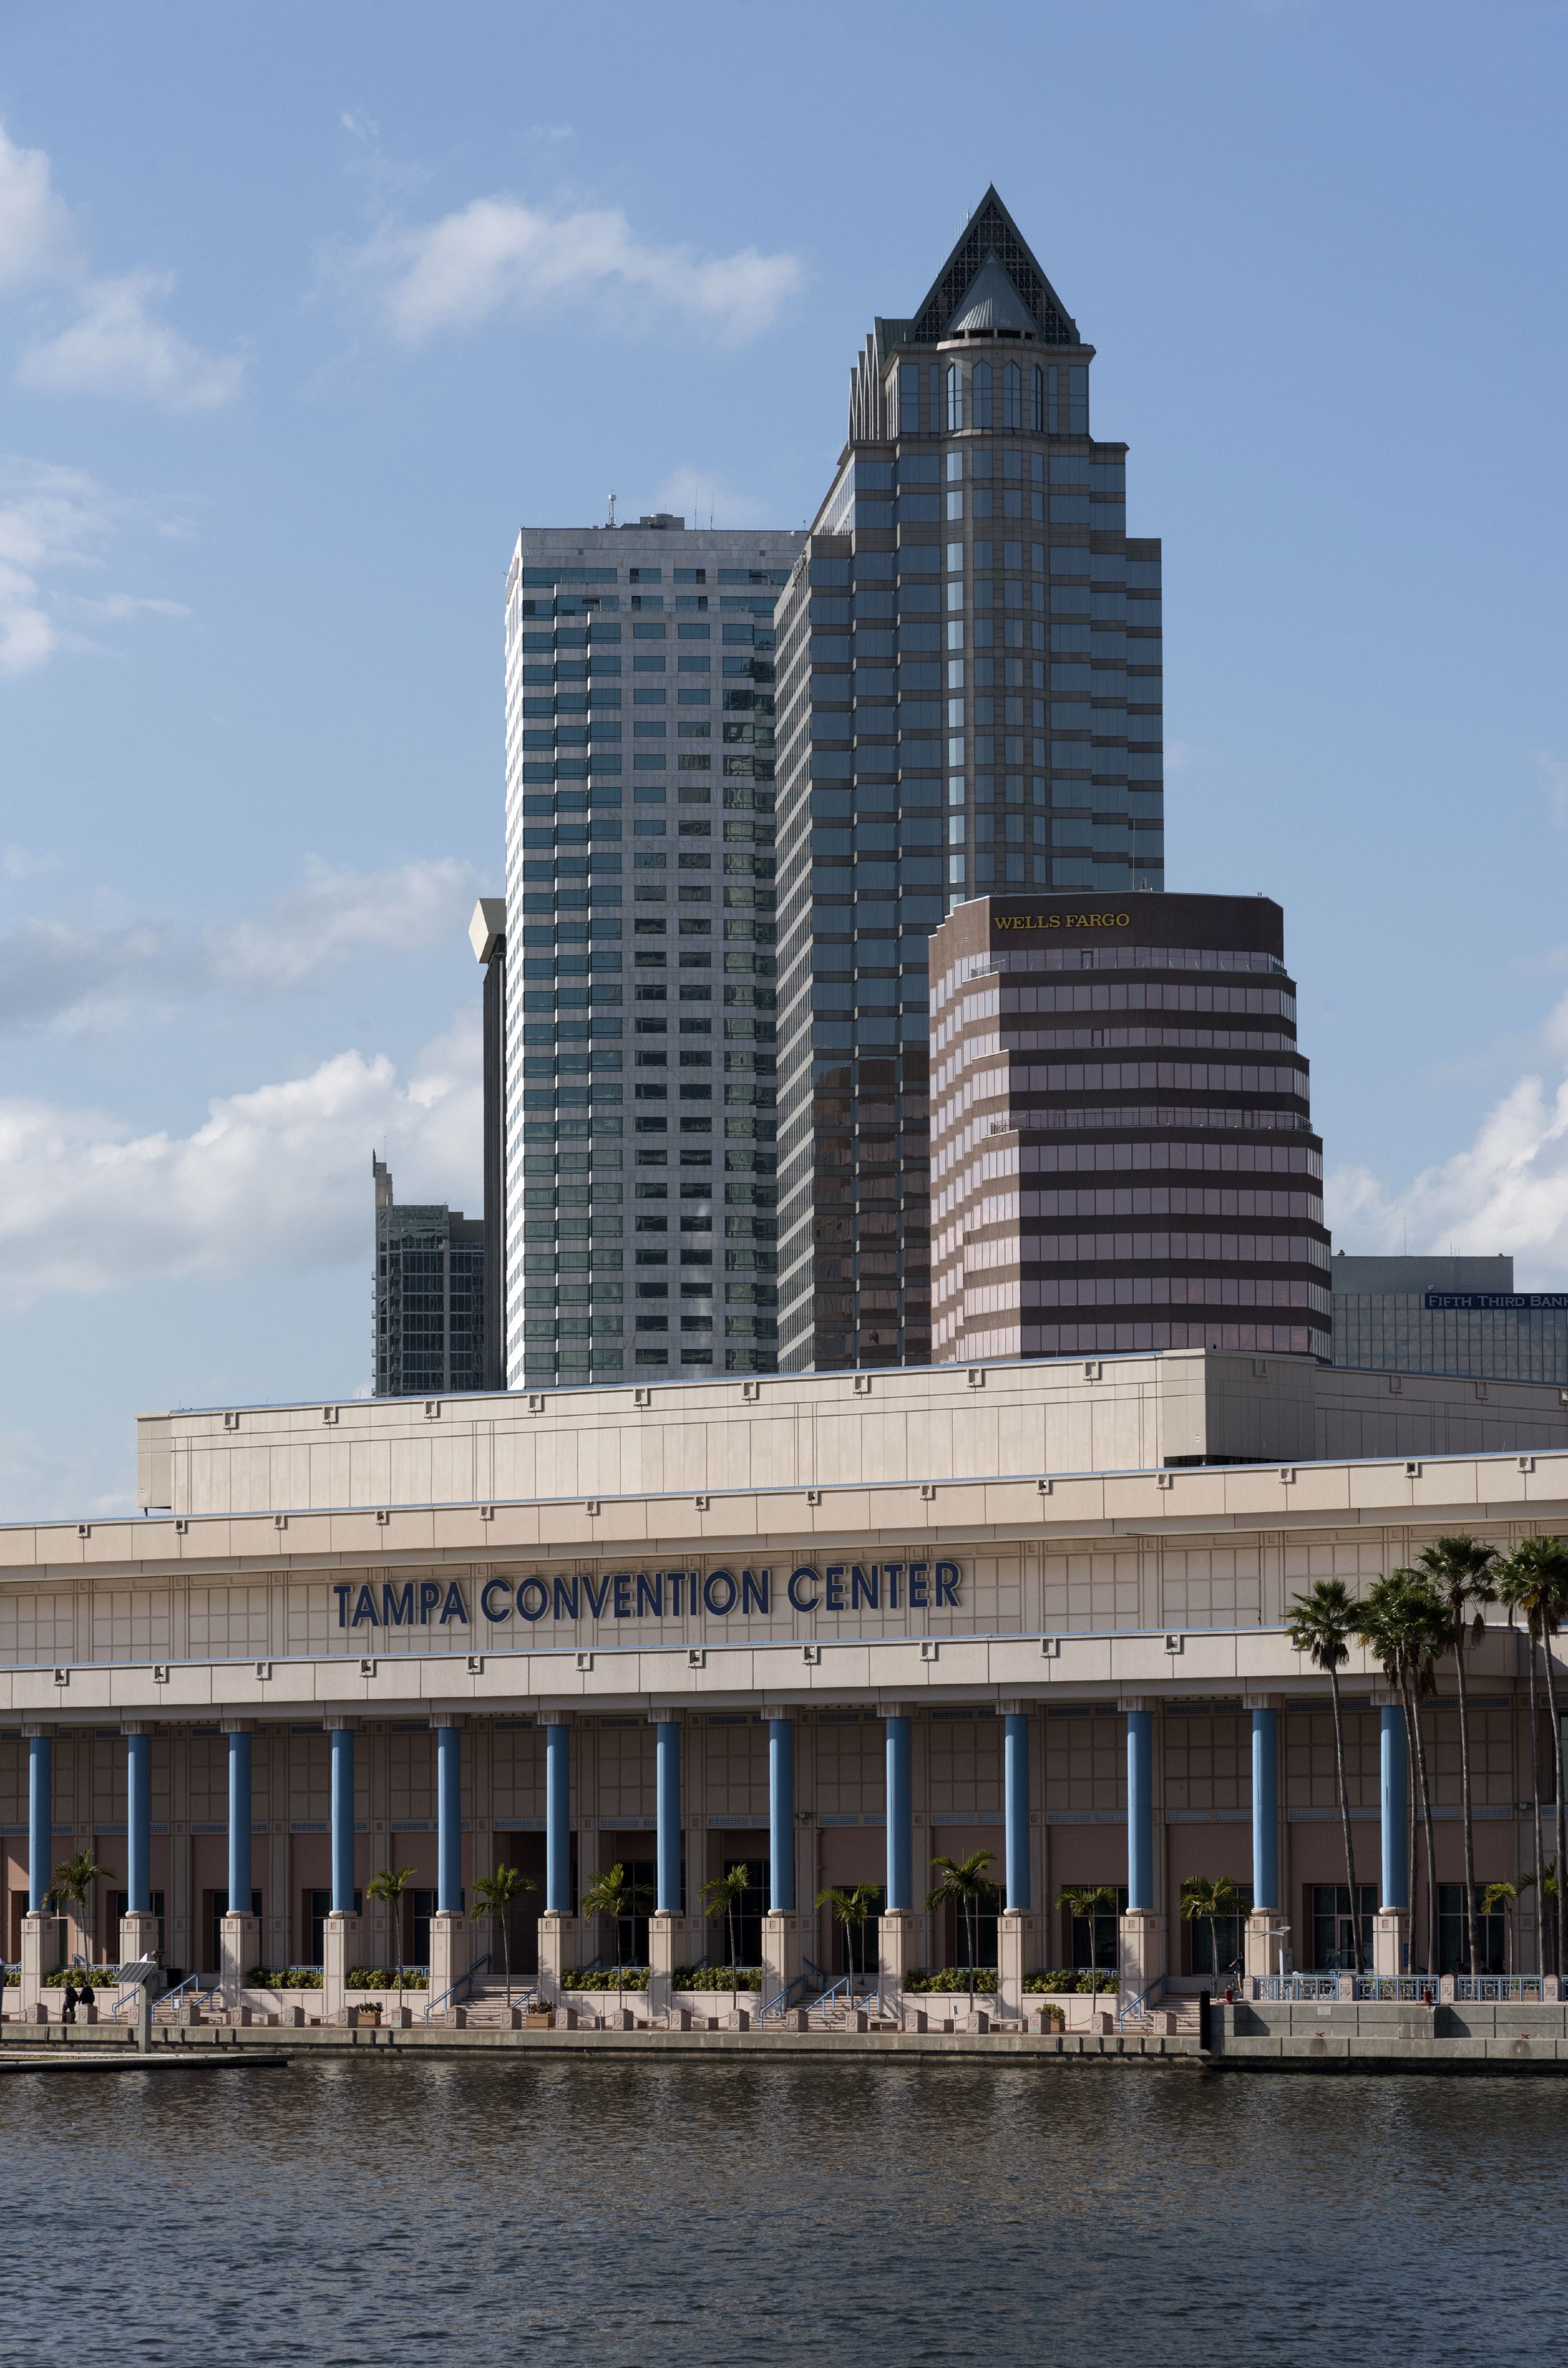 Exterior view of the Tampa Convention Center